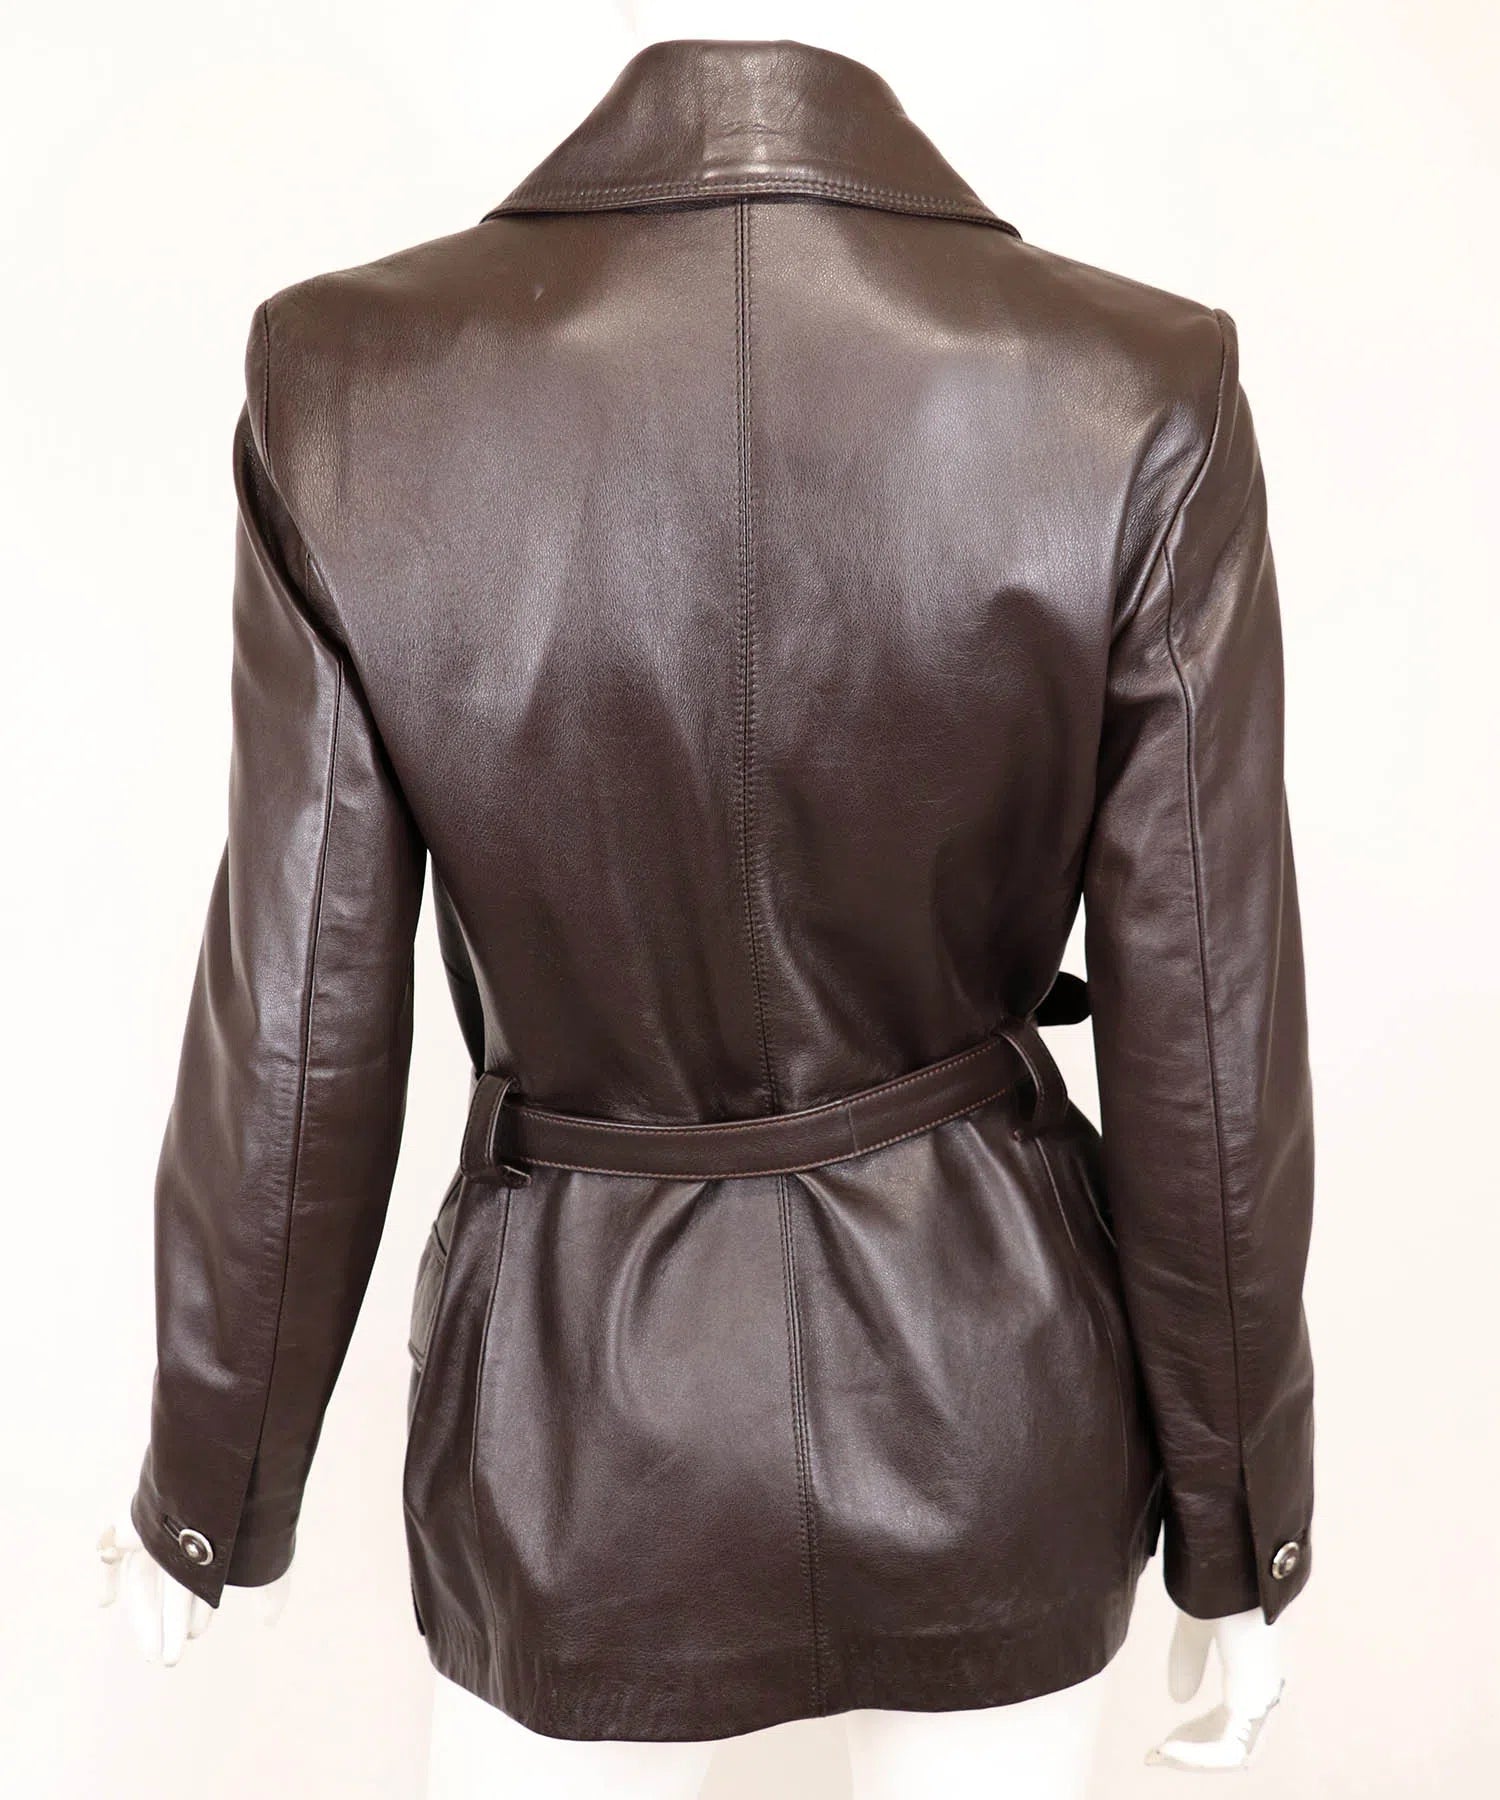 Istante by Versace Leather Jacket - Foxy Couture Carmel